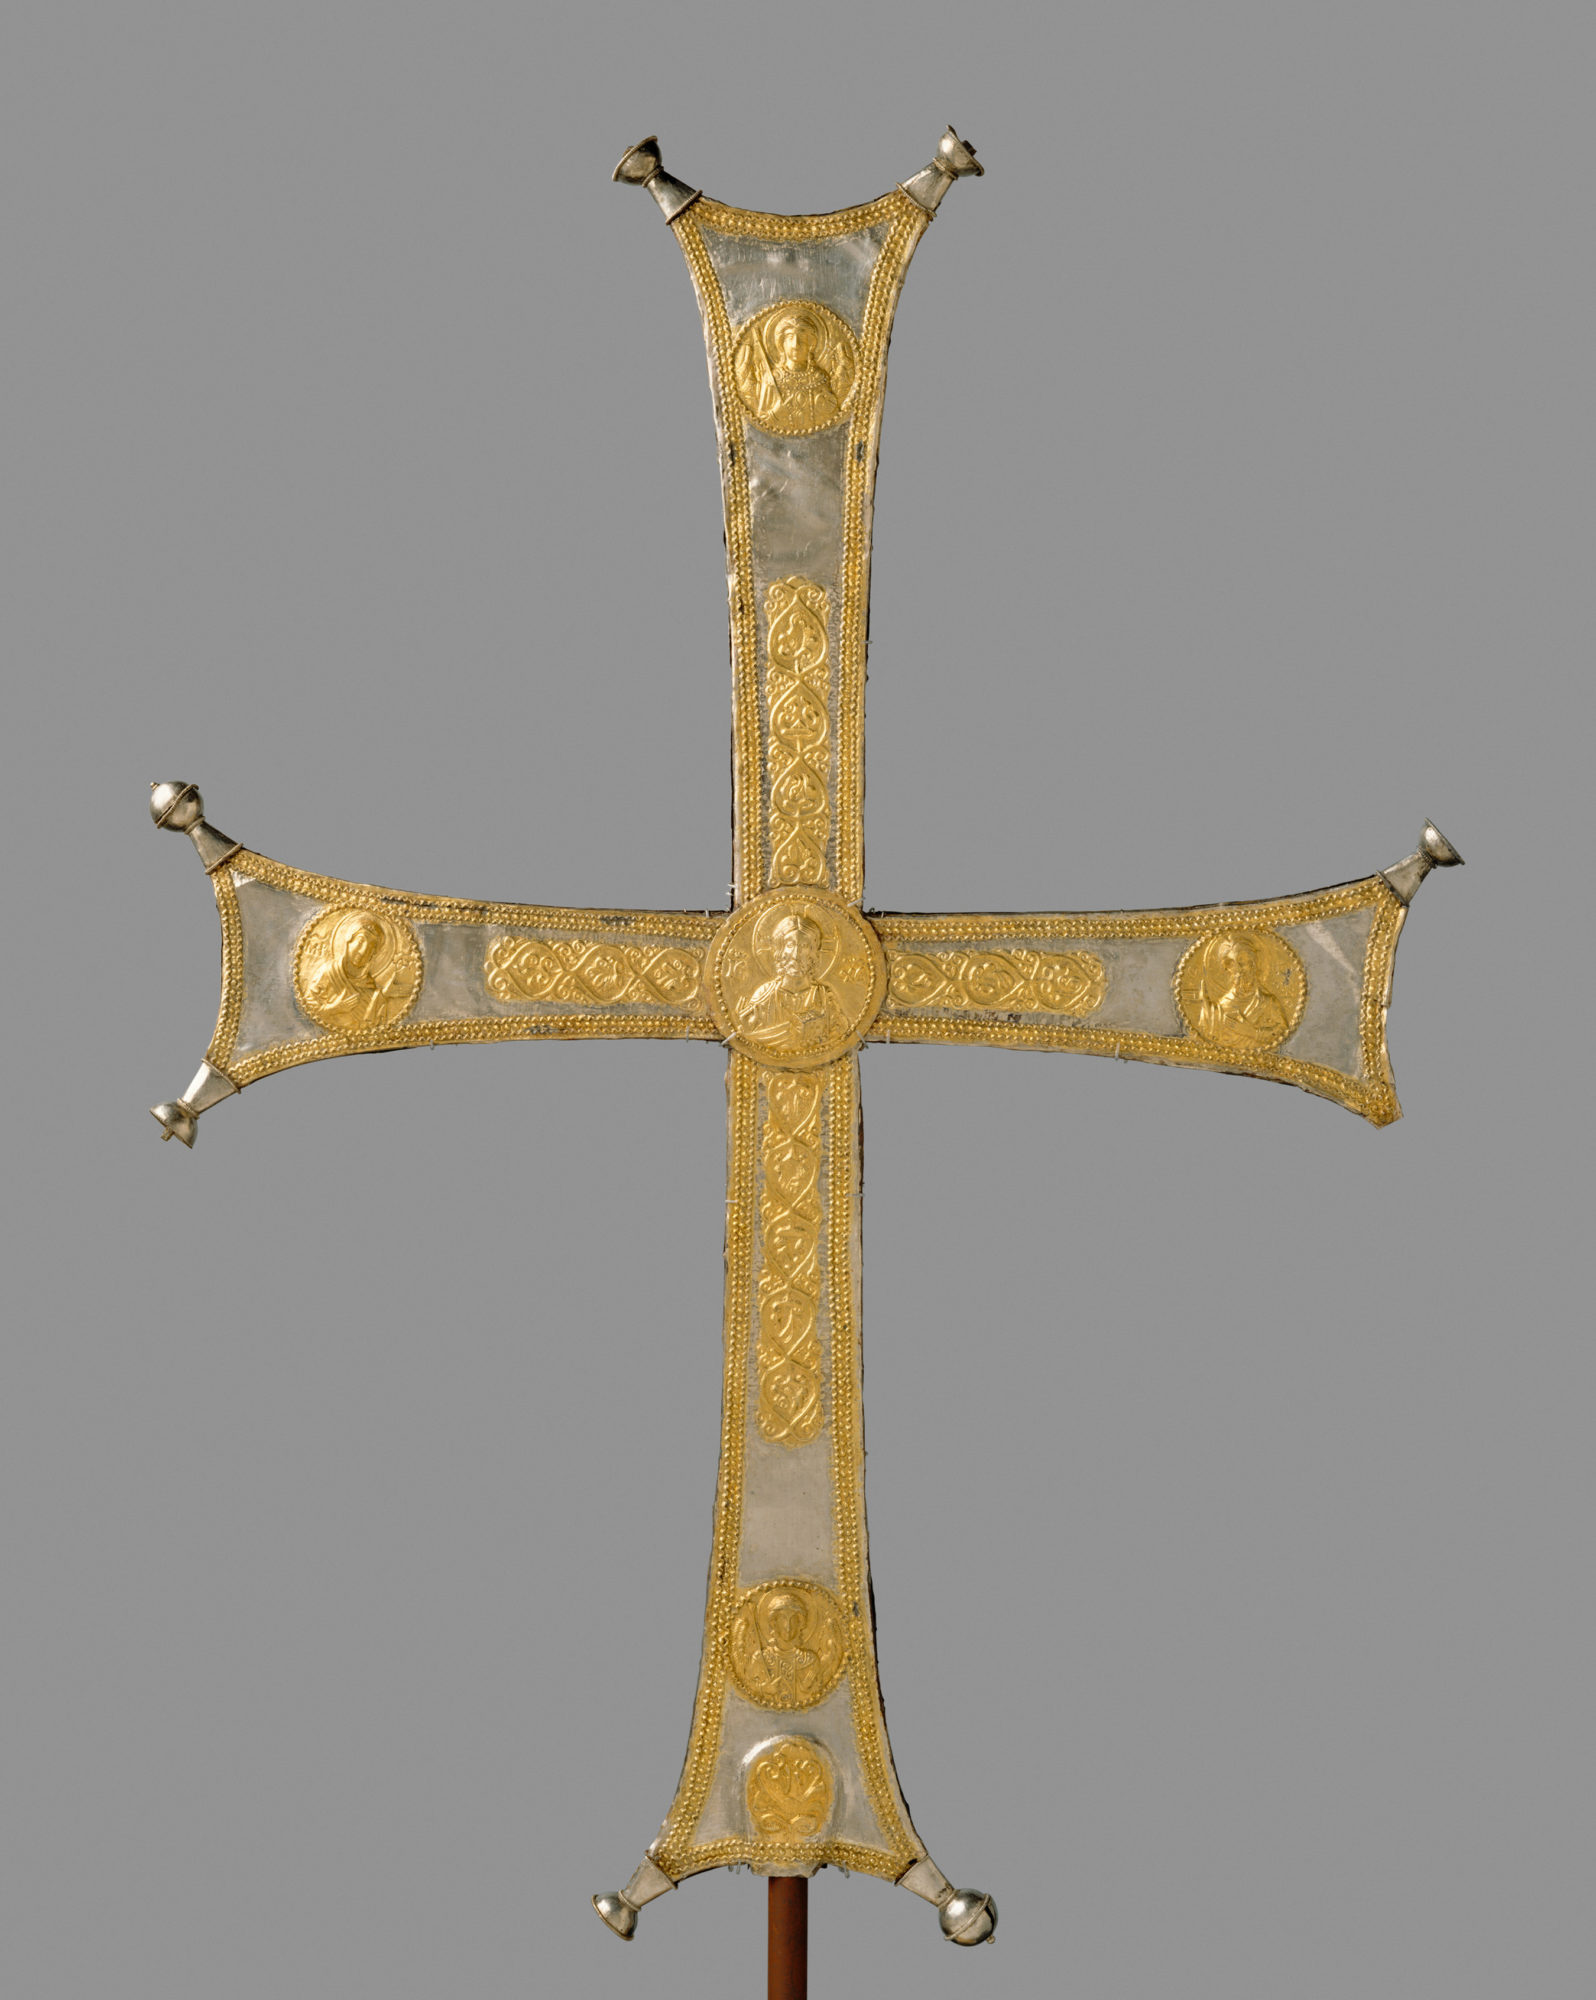 gold-embellished cross on a pole with small circular portraits against a gray background